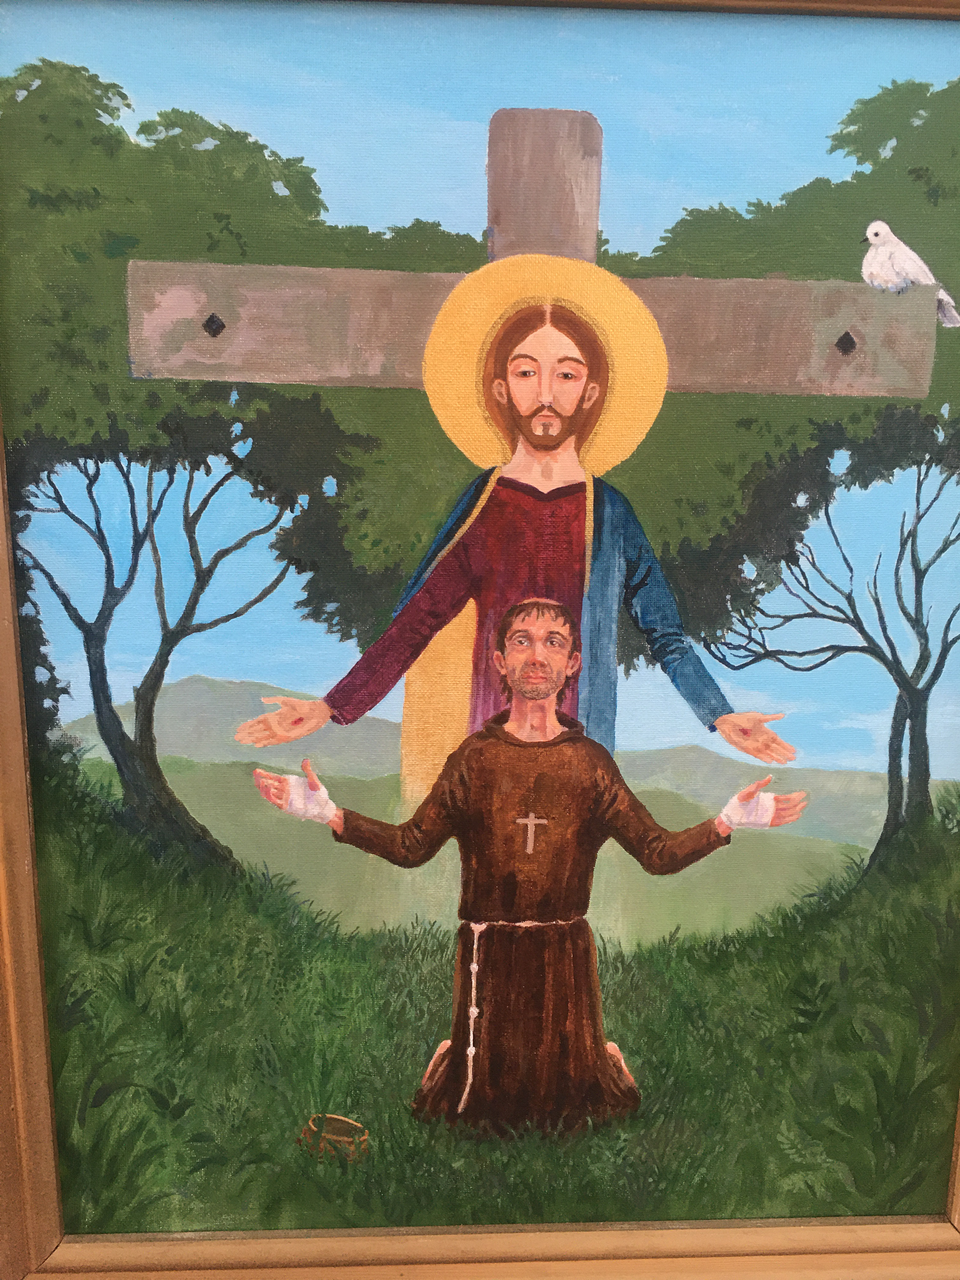 The painting of St Francis